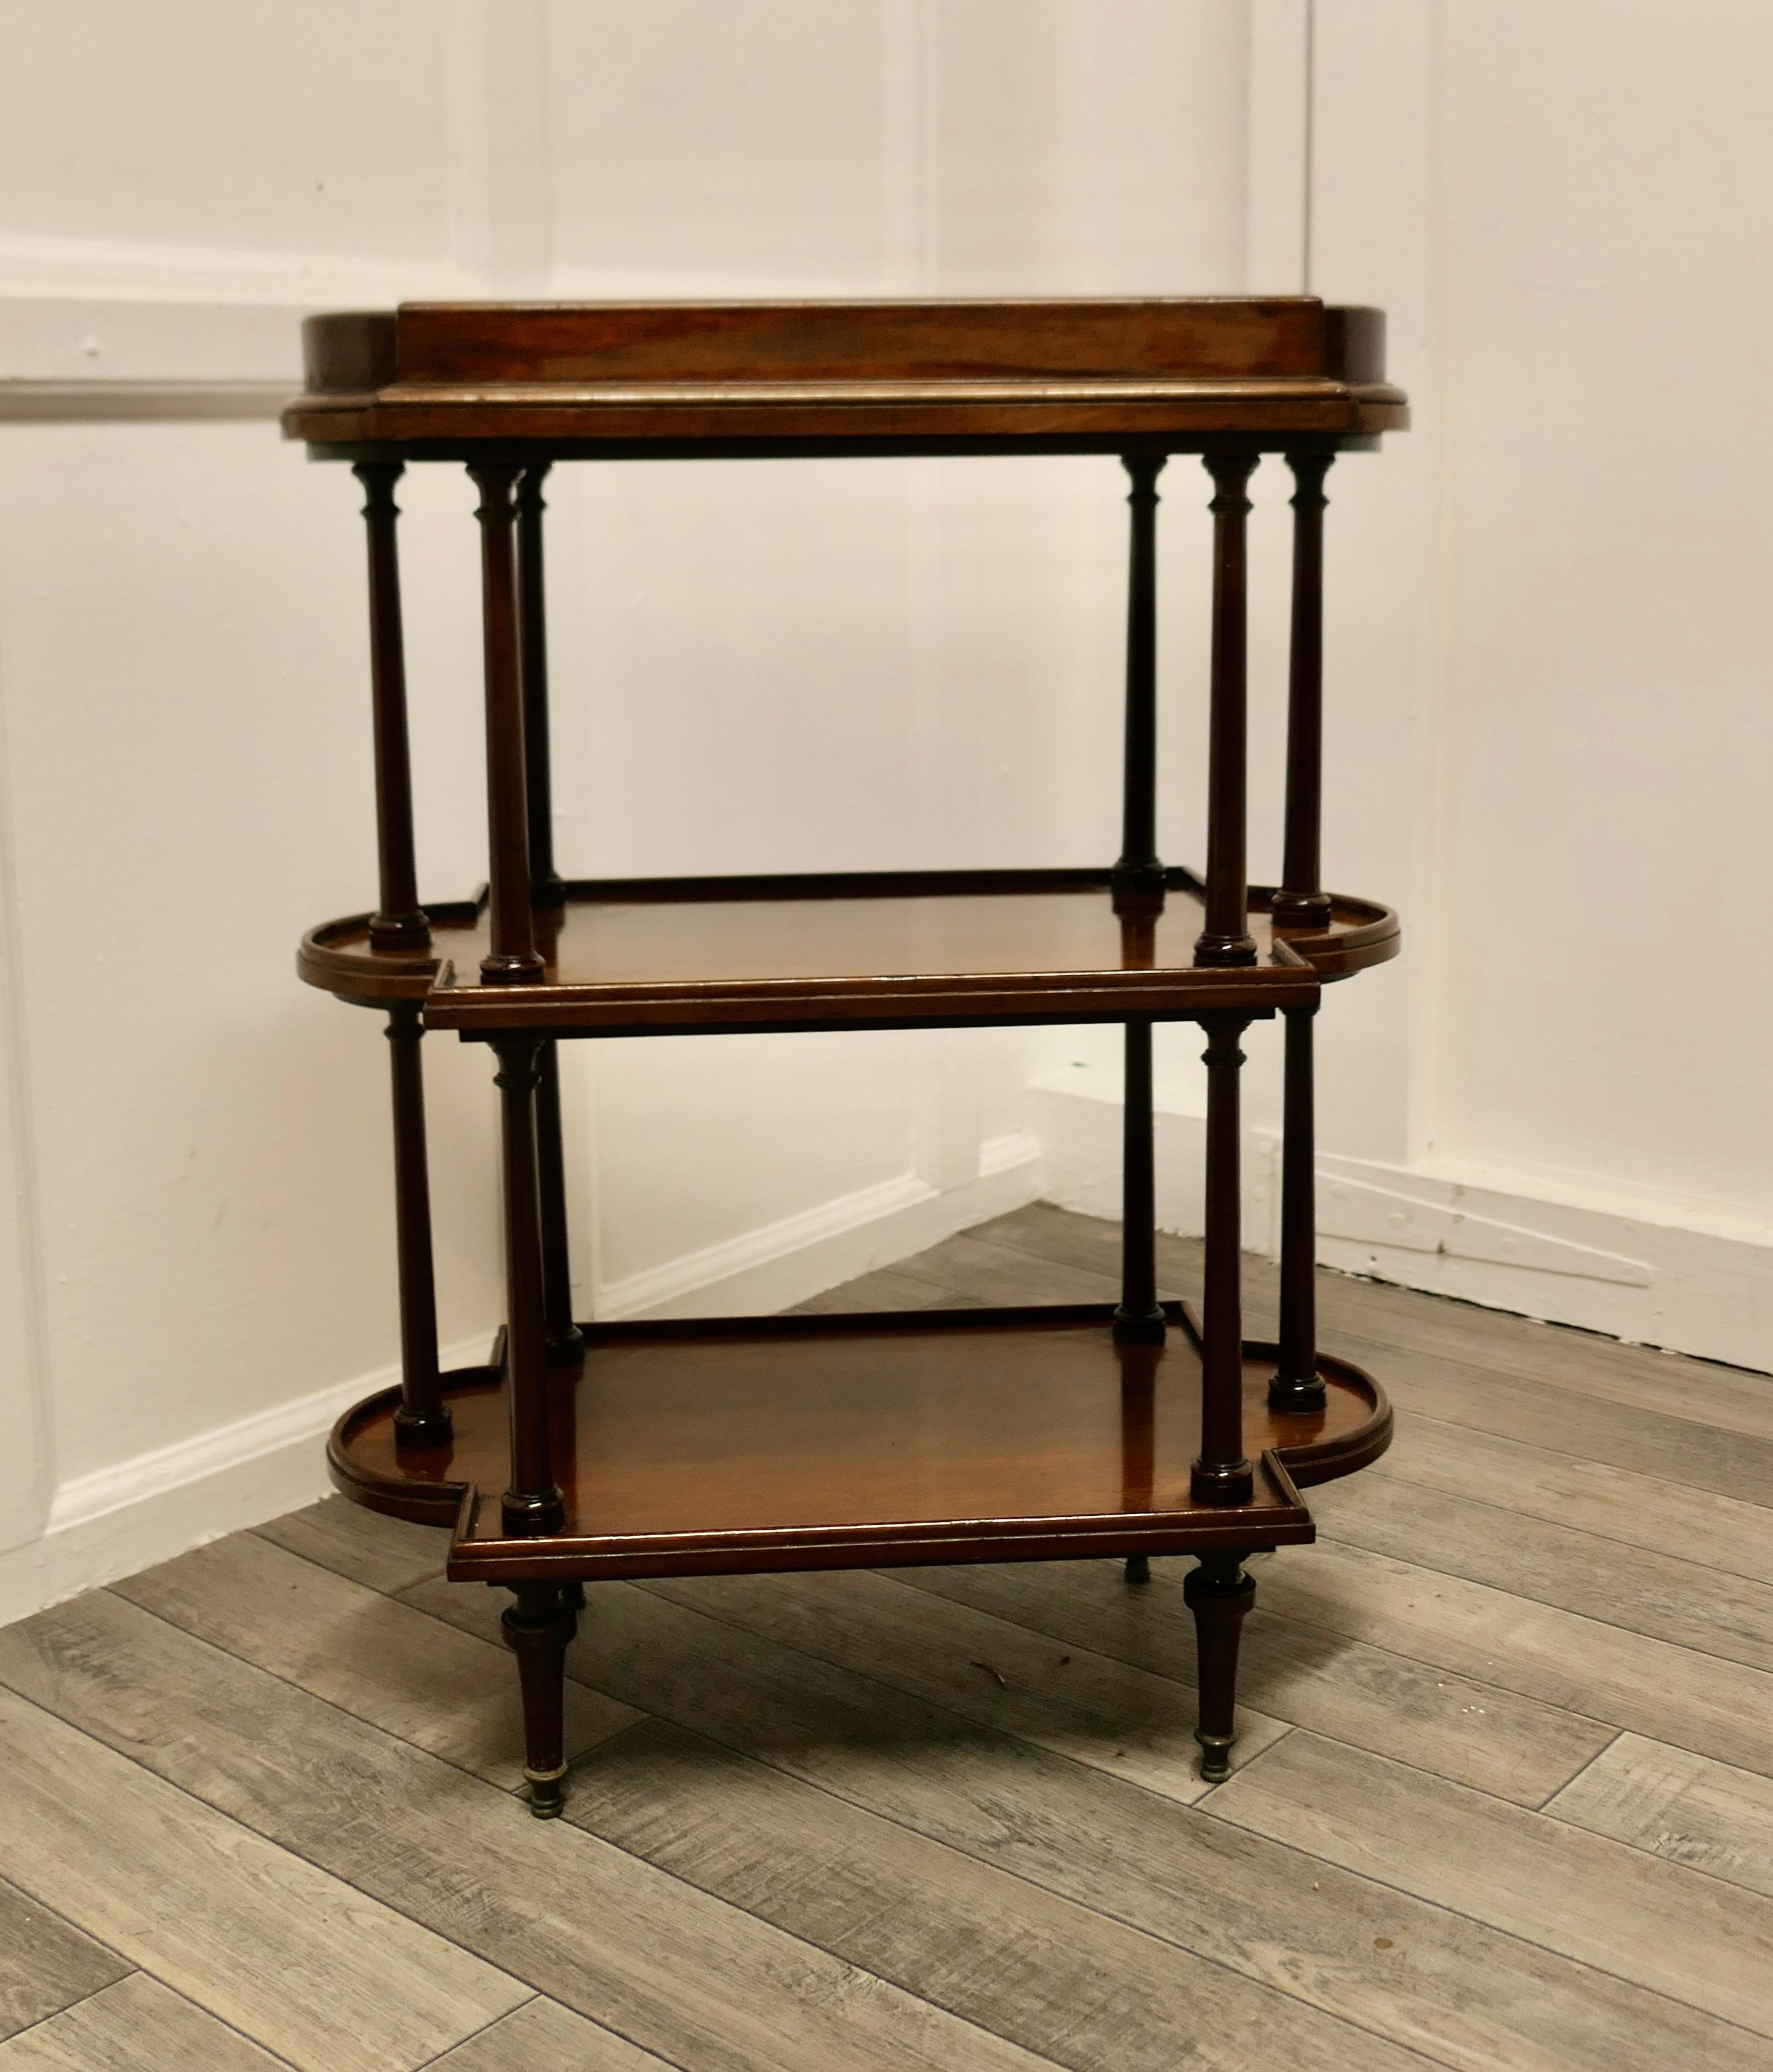 French Walnut 3 Tier Etagere or Occasional table

This useful little stand has three tiers, and a very unusual shape, the top shelf has a raised gallery edge, below this there two more similar shaped tiers and turned legs at the bottom 
This is